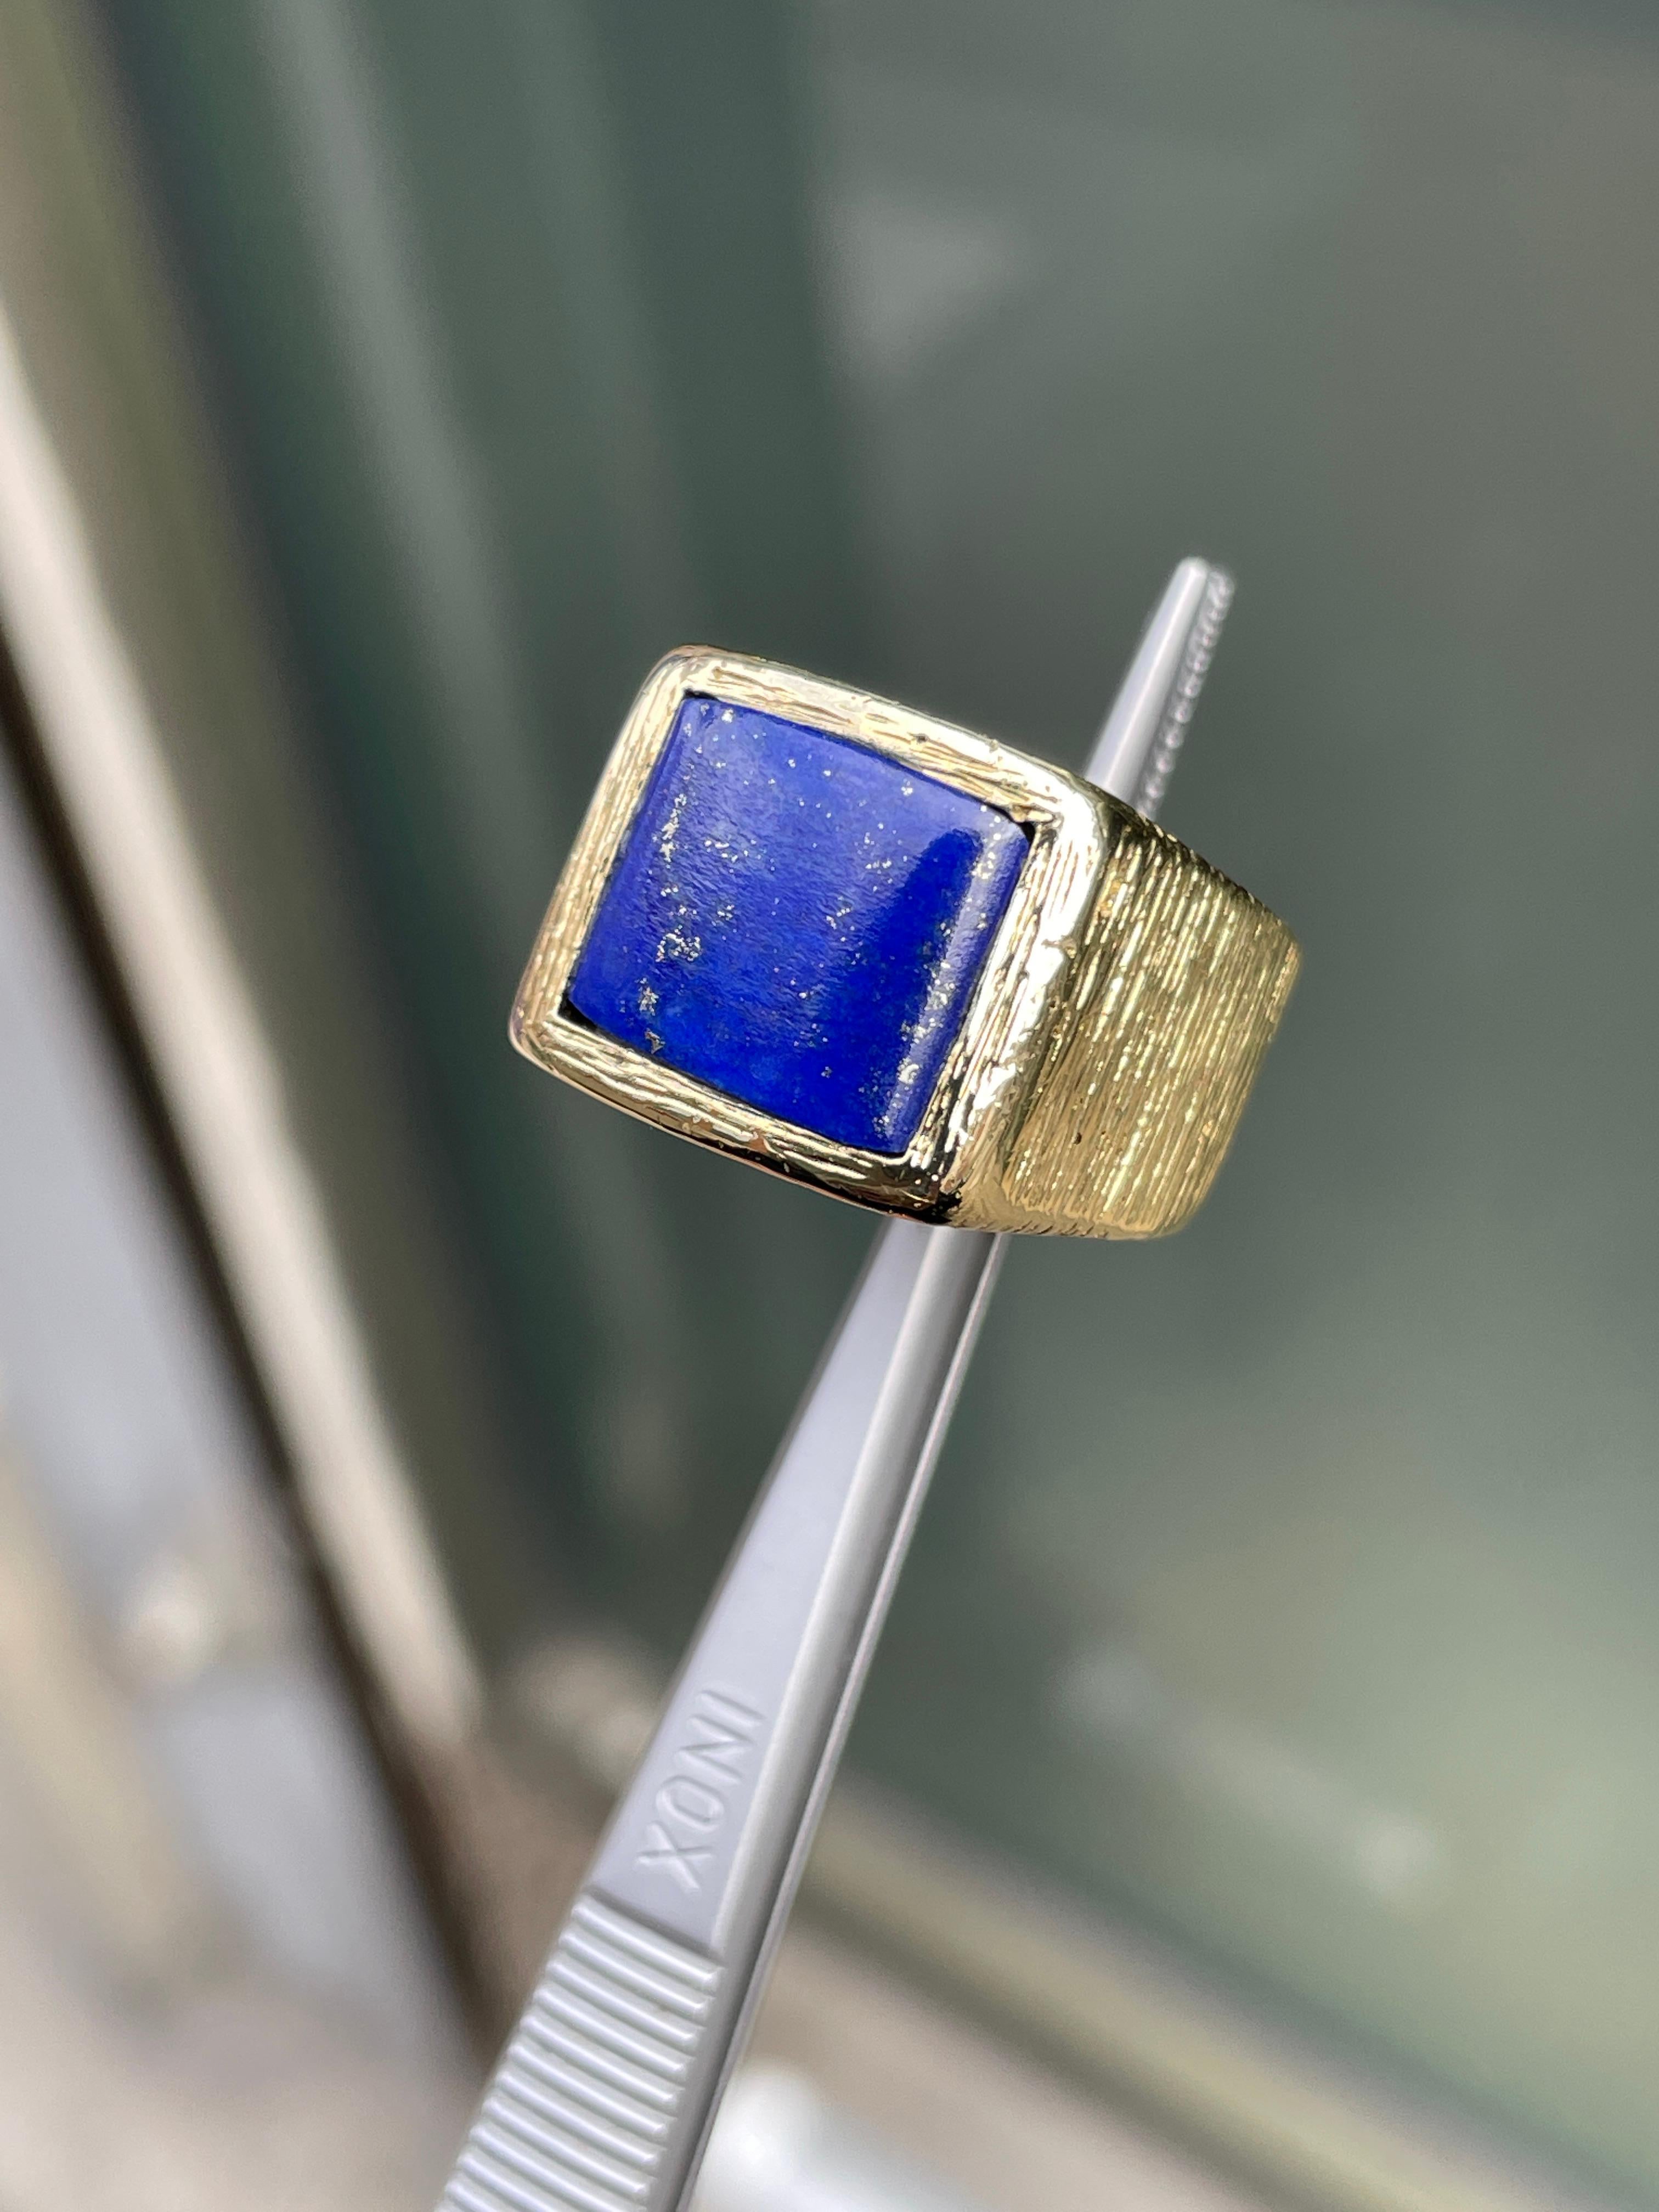 Kutchinsky Lapis Lazuli 18 Carat Yellow Gold Textured Signet Ring, 1976 In Good Condition For Sale In London, GB